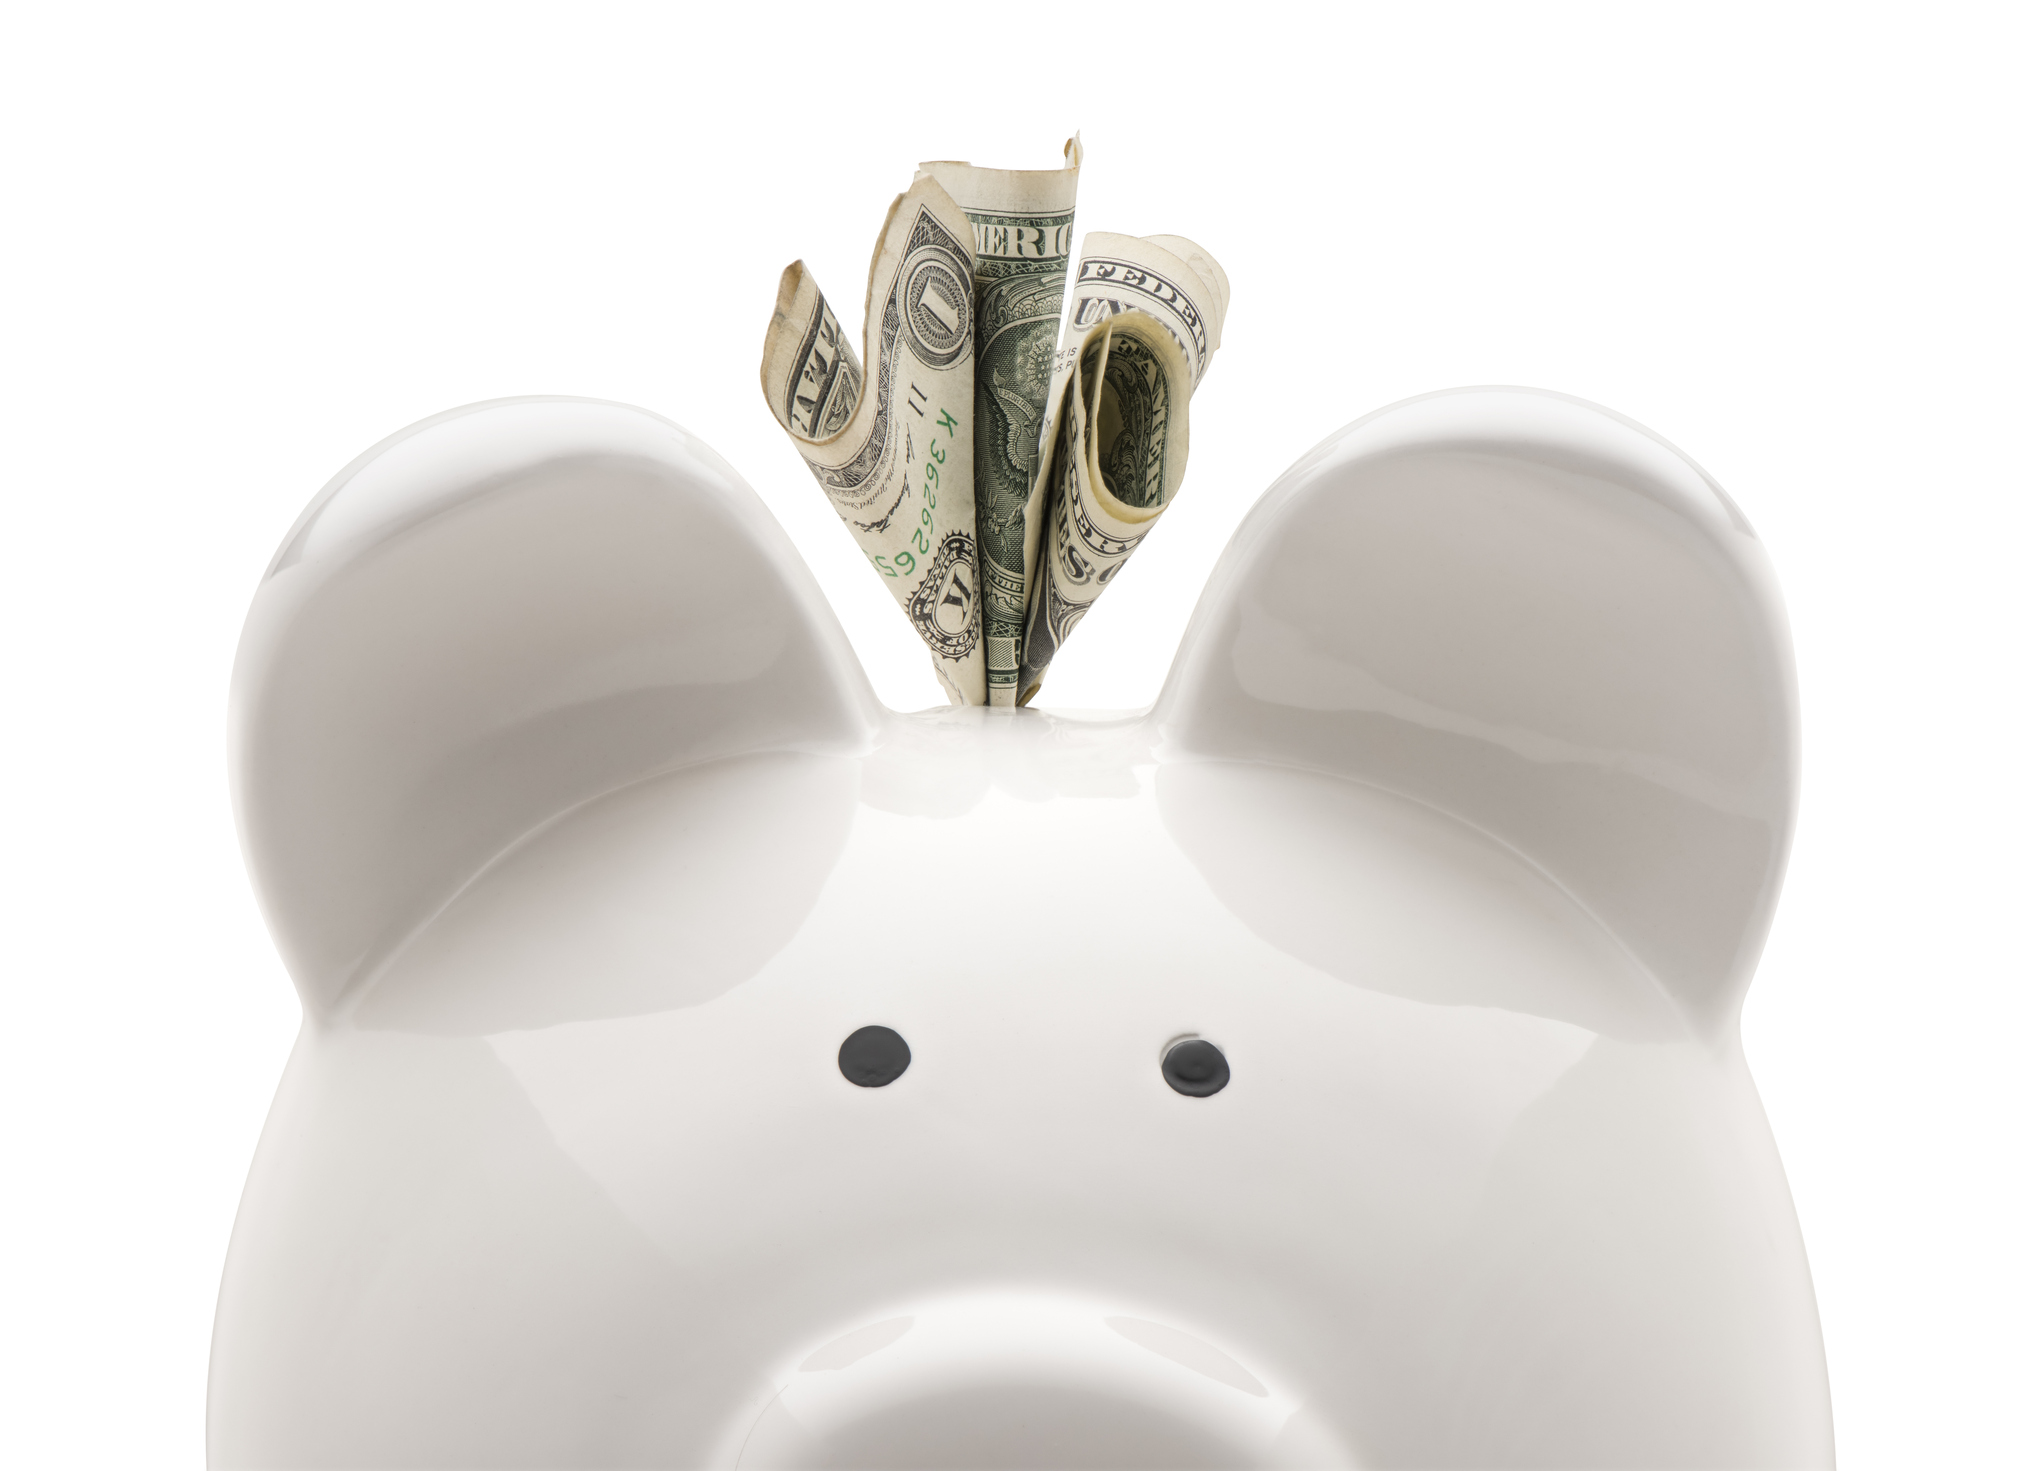 A white piggy bank with money coming out the top of it, against a white background.